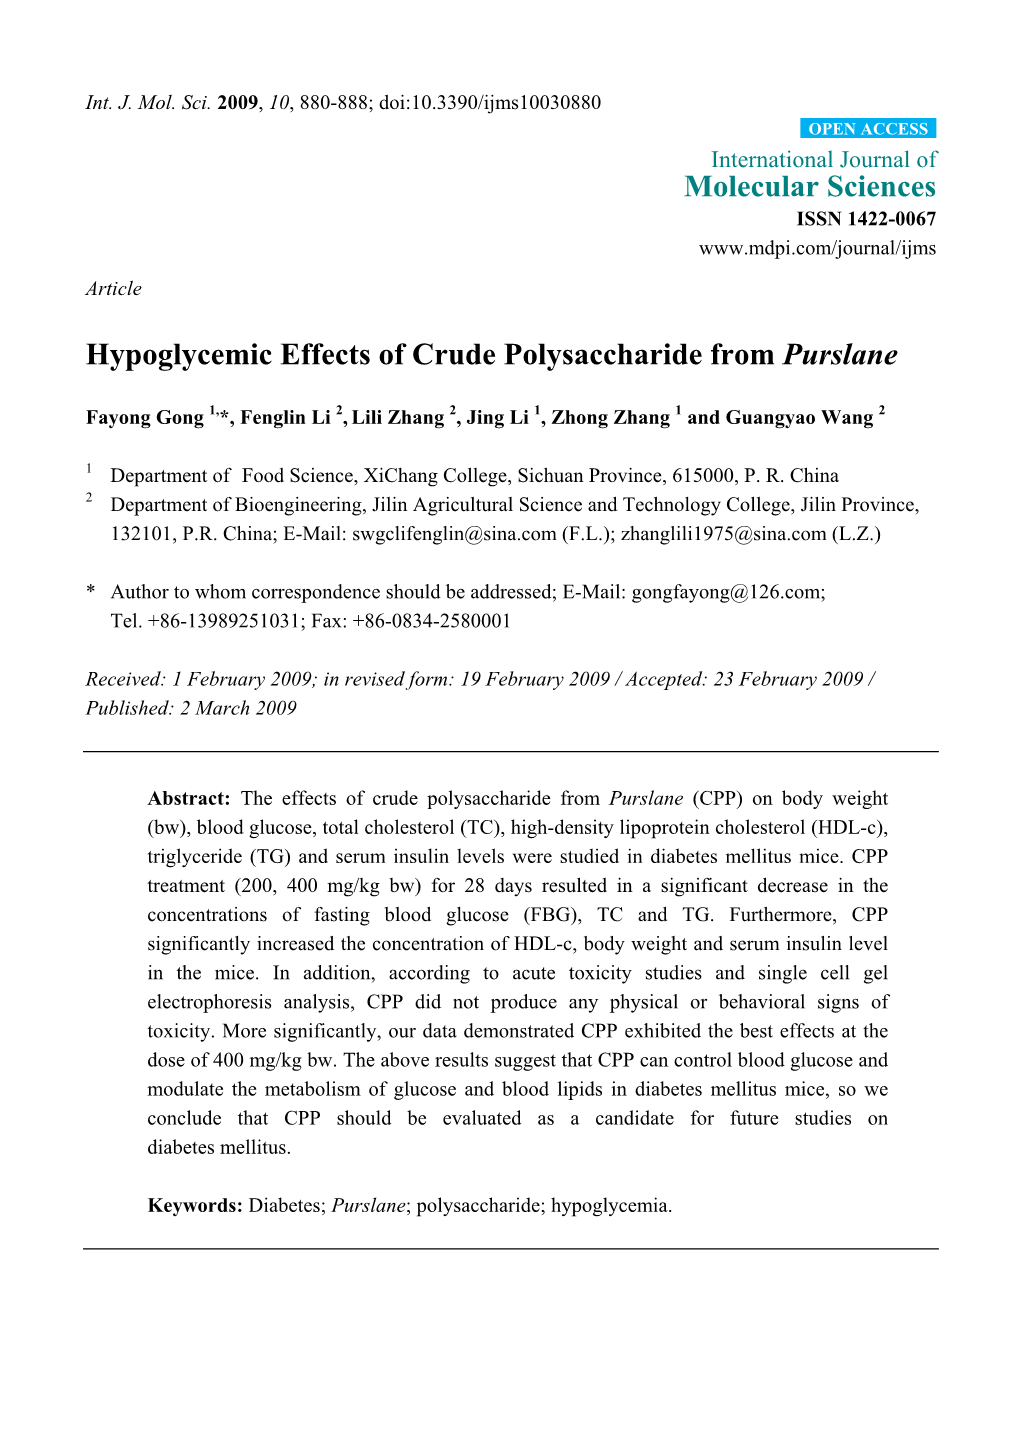 Hypoglycemic Effects of Crude Polysaccharide from Purslane